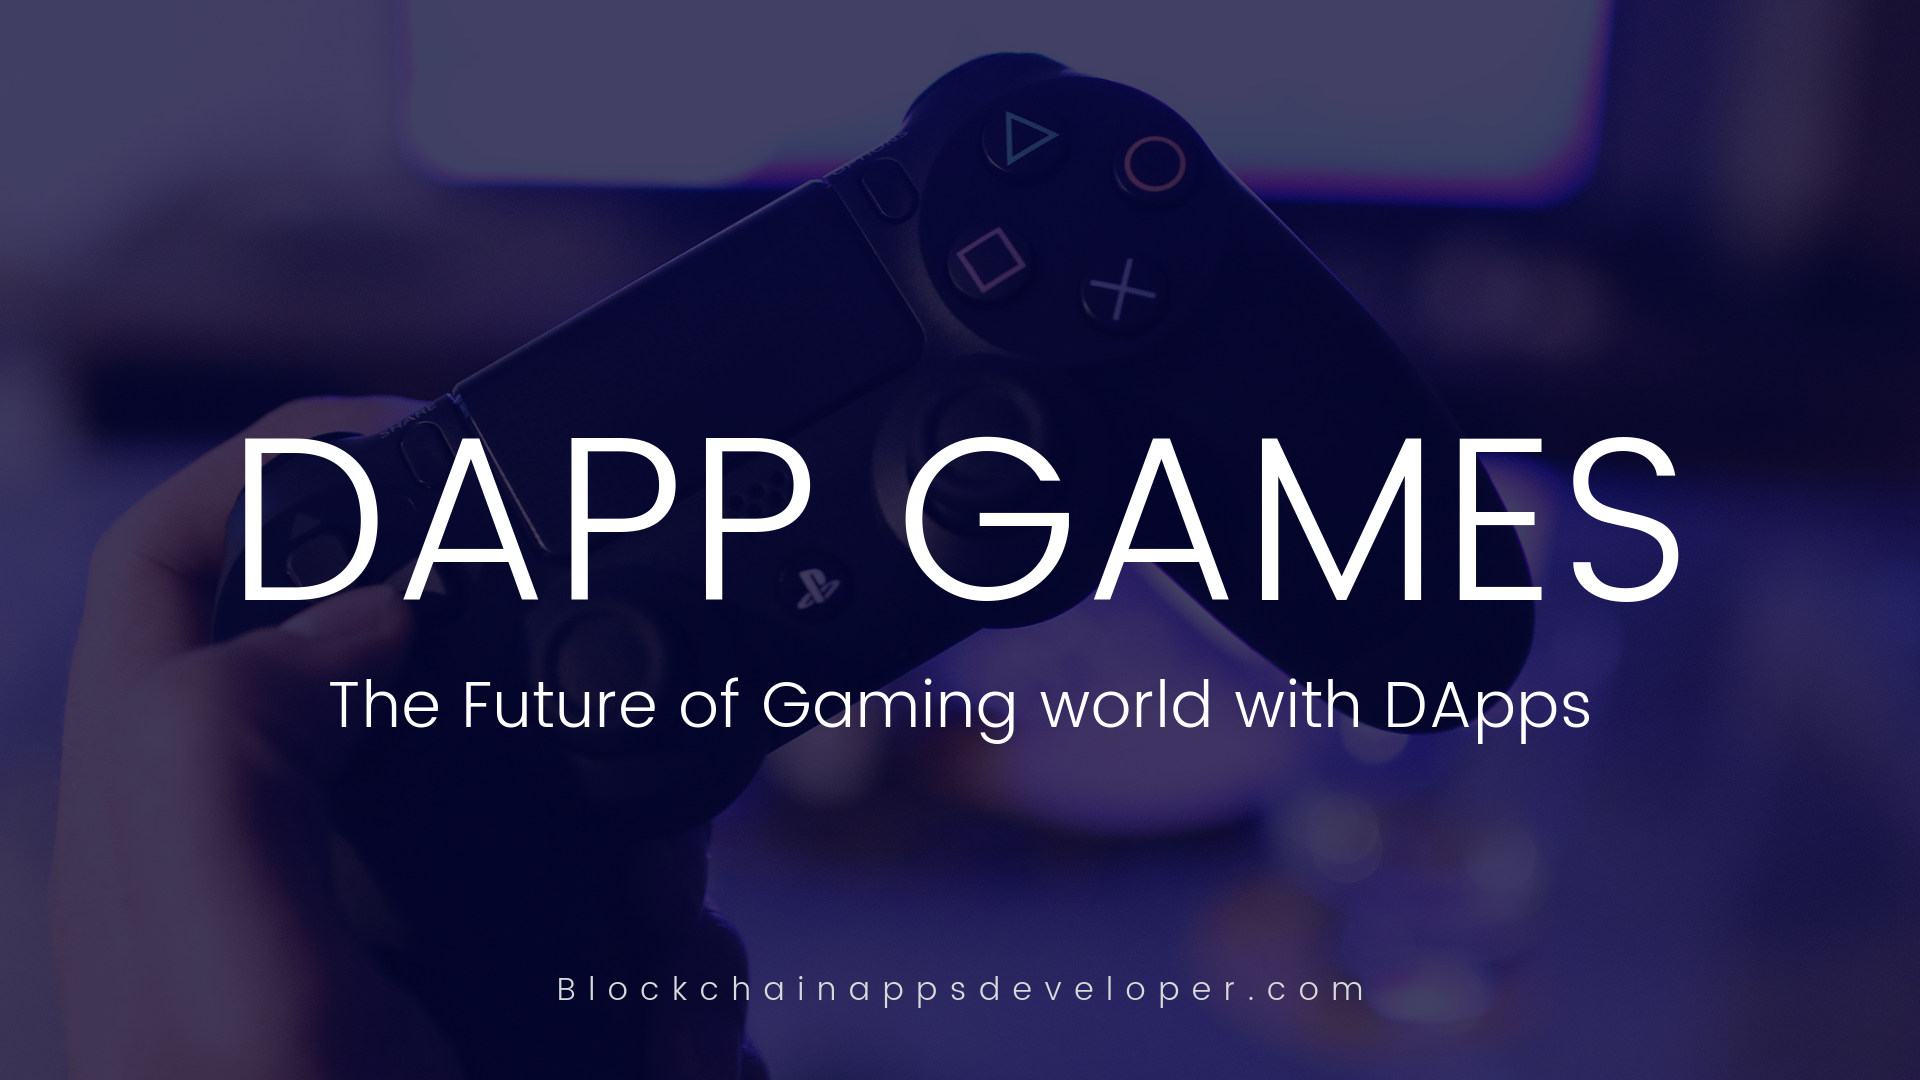 DAPPS - THE FUTURE OF GAMING WORLD